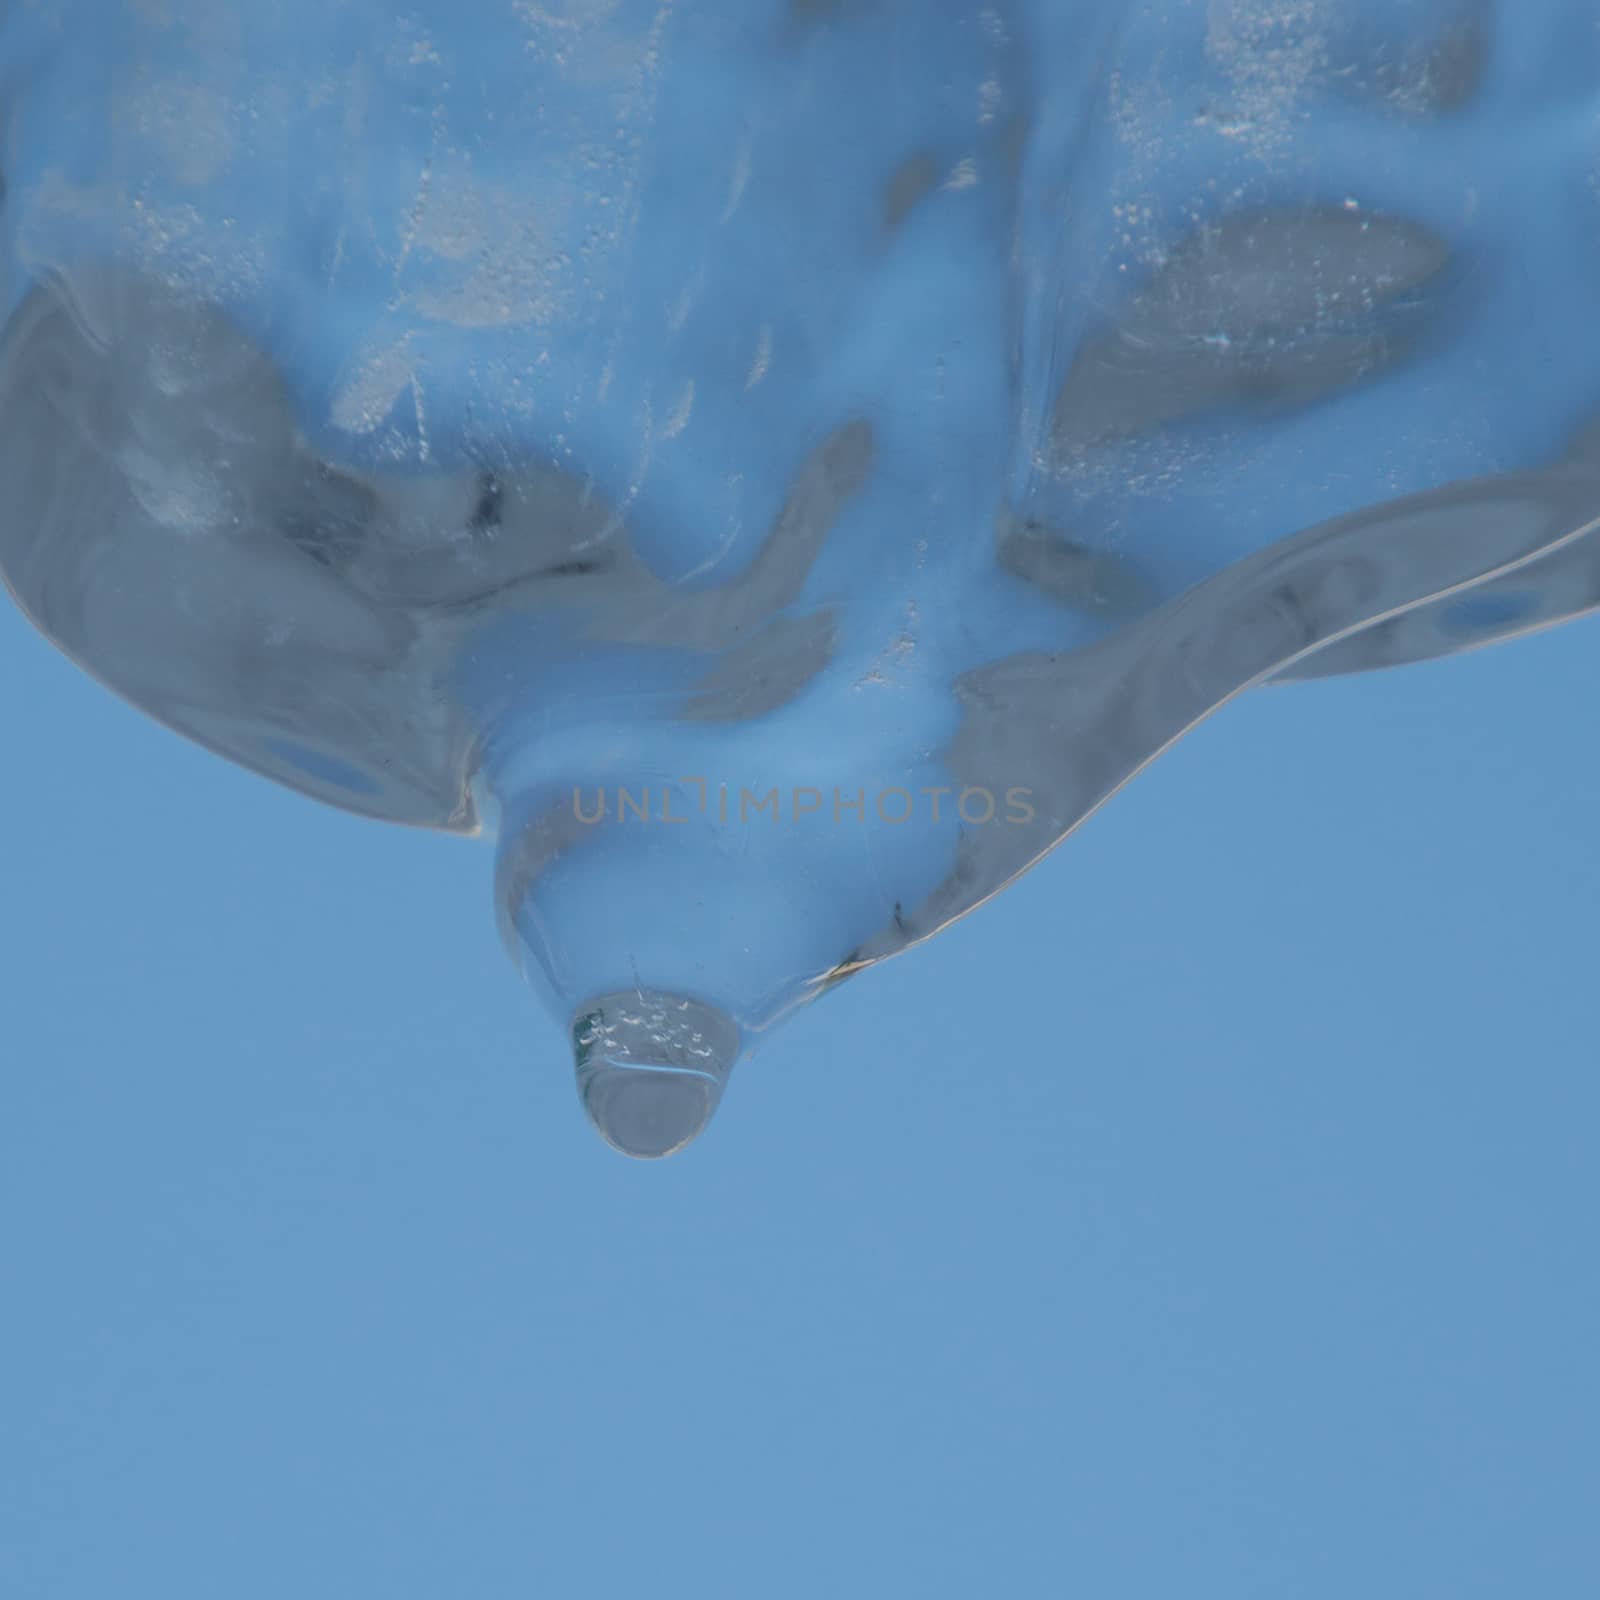 Abstract image of sky blue background and looking up at a wide crystal clear icicle melting and dripping water.